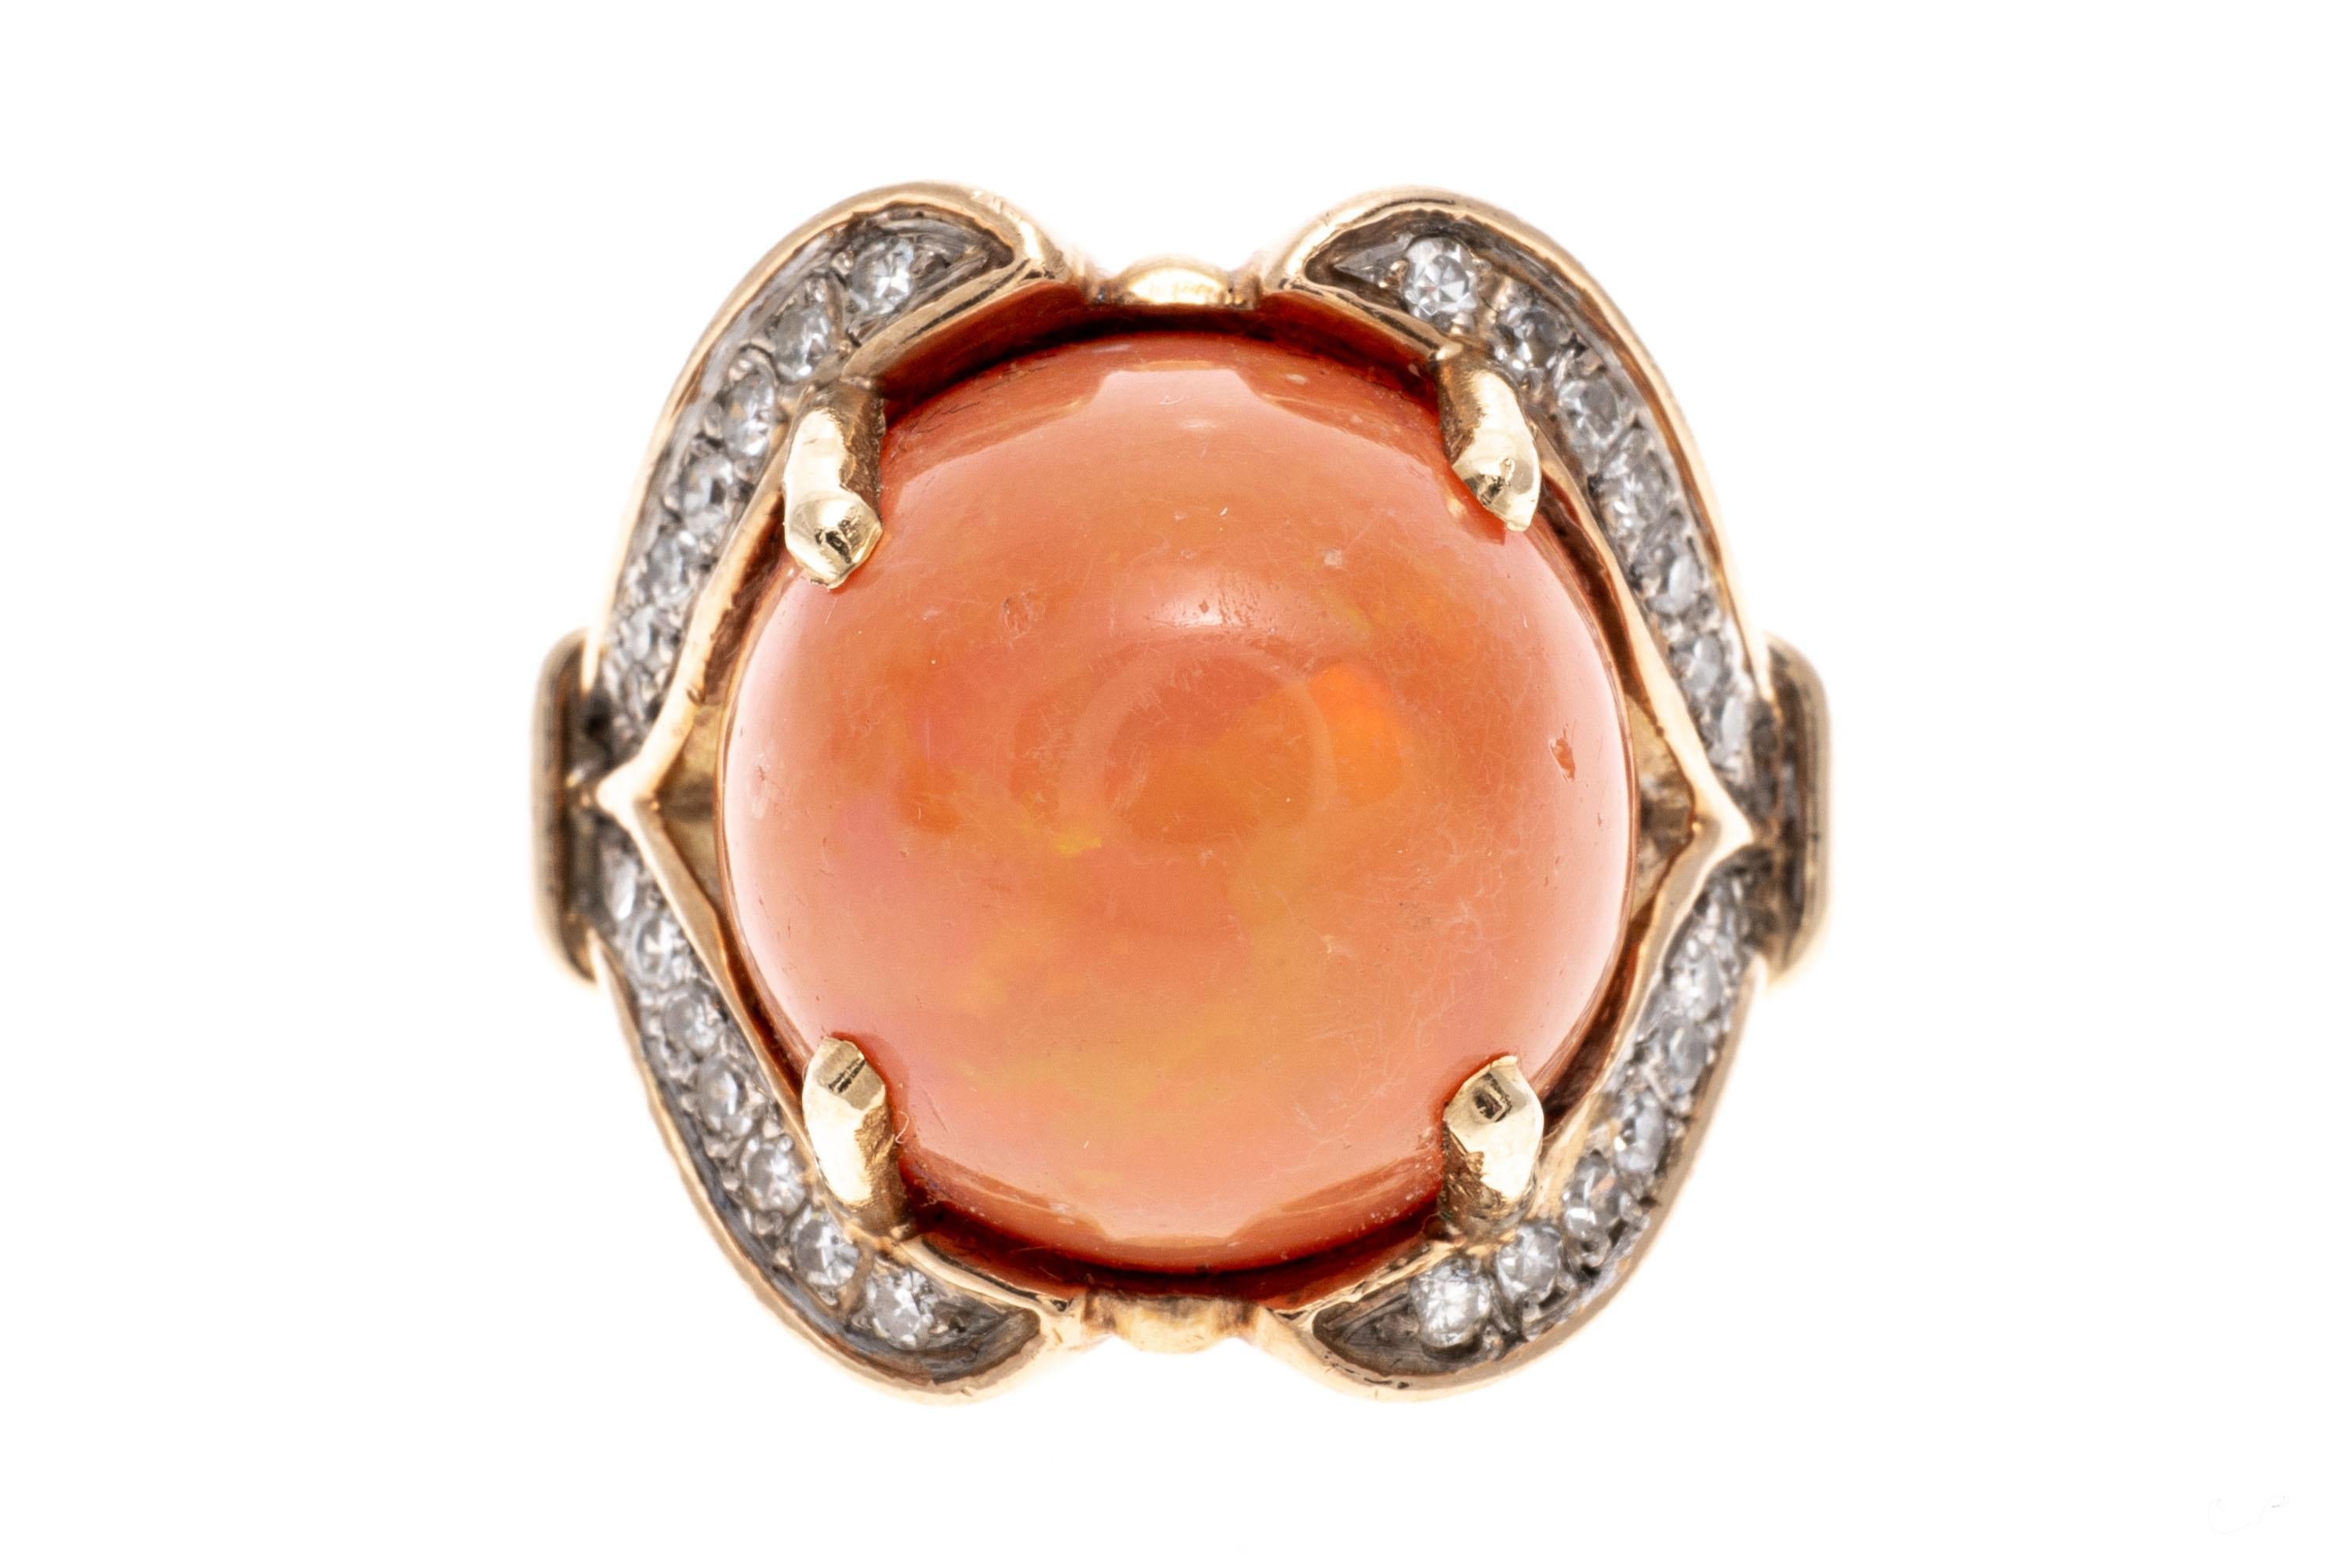 14k yellow gold ring. This stunning ring contains a large center fire opal, a round ball in shape and medium orange with flashes of green color, approximately 10.9 CTS and prong set. Flanking the center is a pretty swirl, set with round, faceted